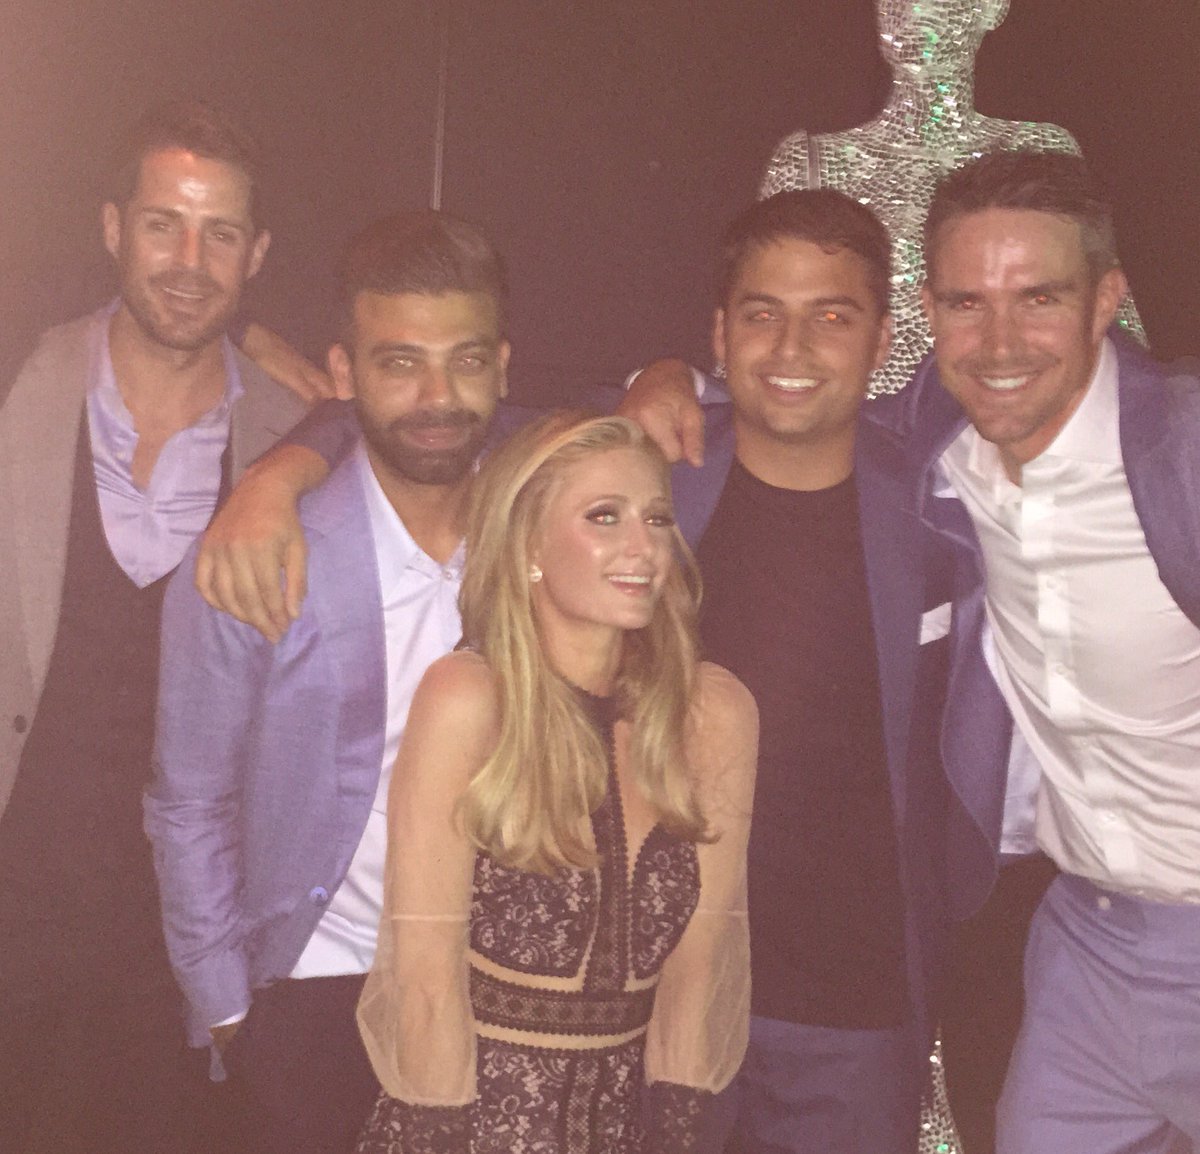 RT @KP24: Last nights madness! @jamiereuben's 40th bday hosted by the great man, @Amit_Bhatia99 with, @ParisHilton DJ'ing! ???????????? https://t.co…